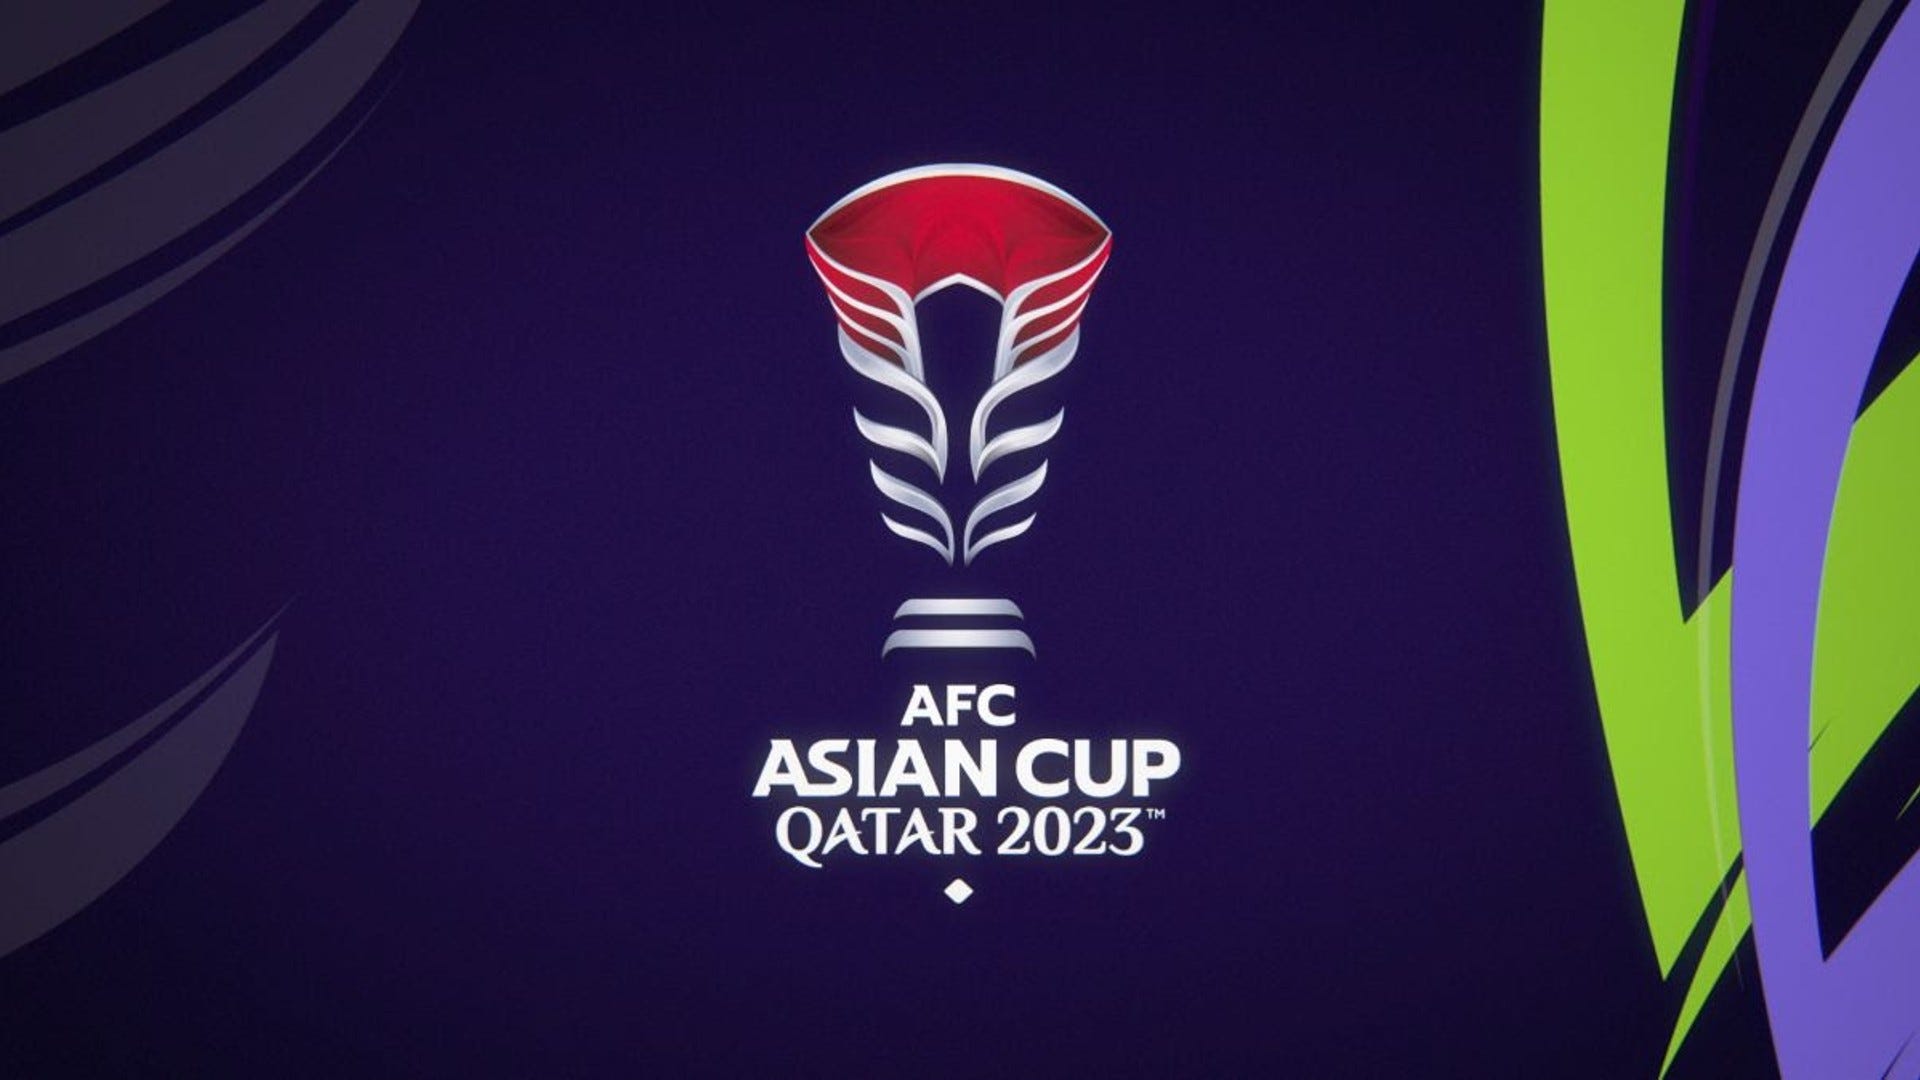 Don't Miss Out on AFC Asian Cup 2023 – Tickets Available Soon!